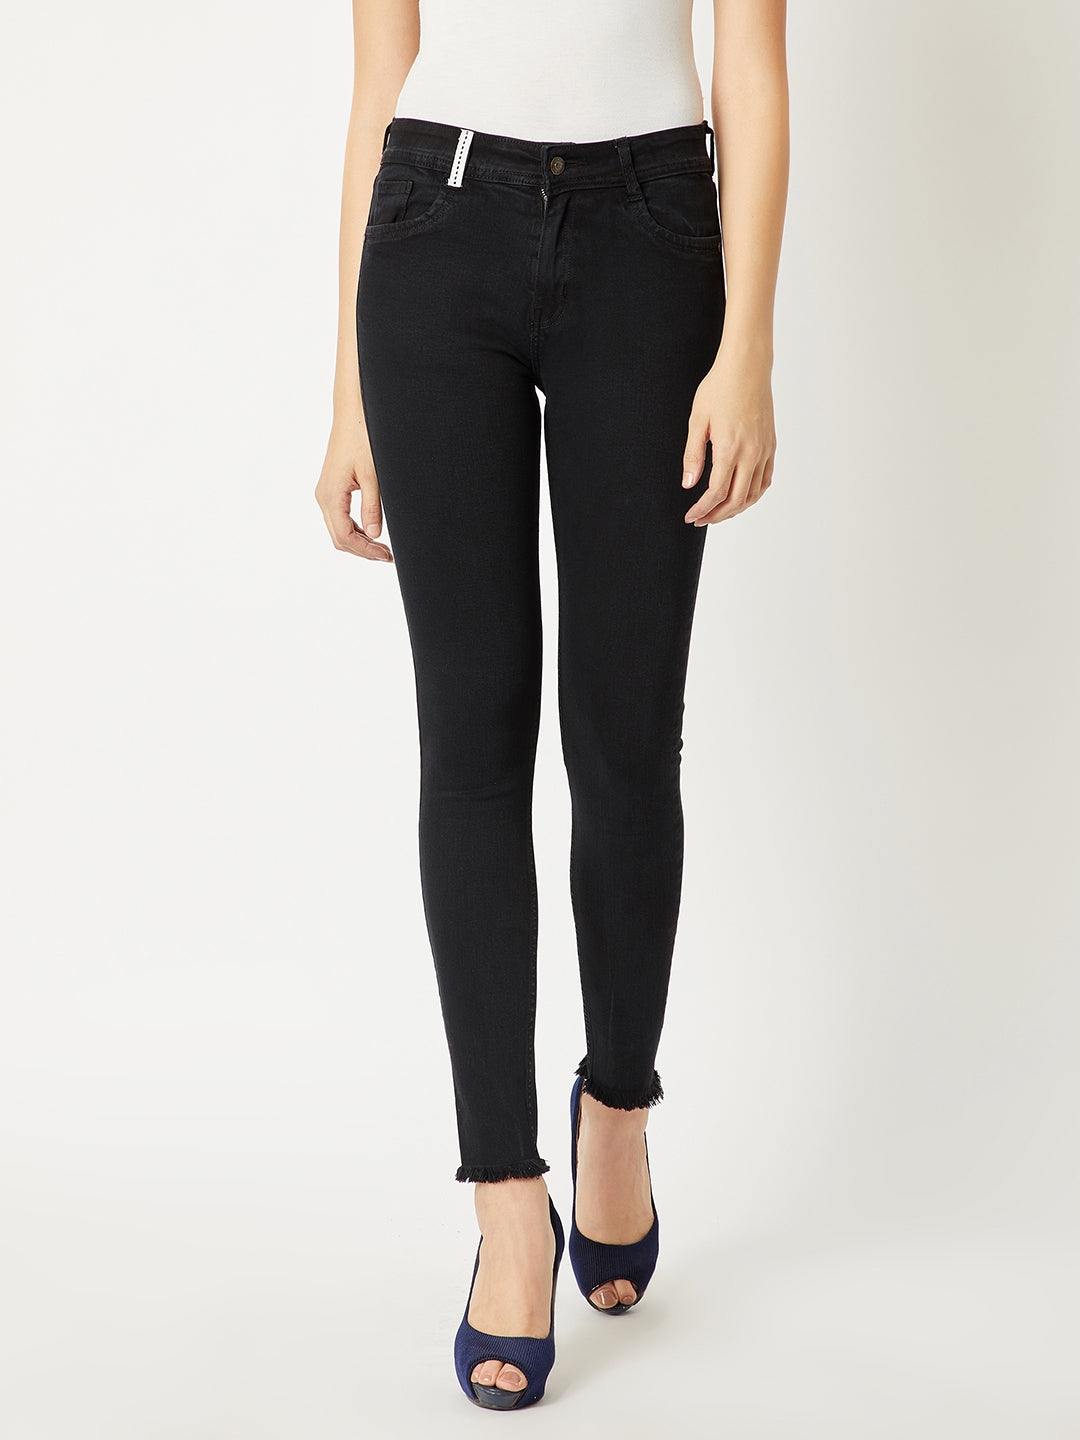 MISS CHASE | Black Solid Skinny Knitted Twill Tape Detailing Regular Length High Waist Jeggings